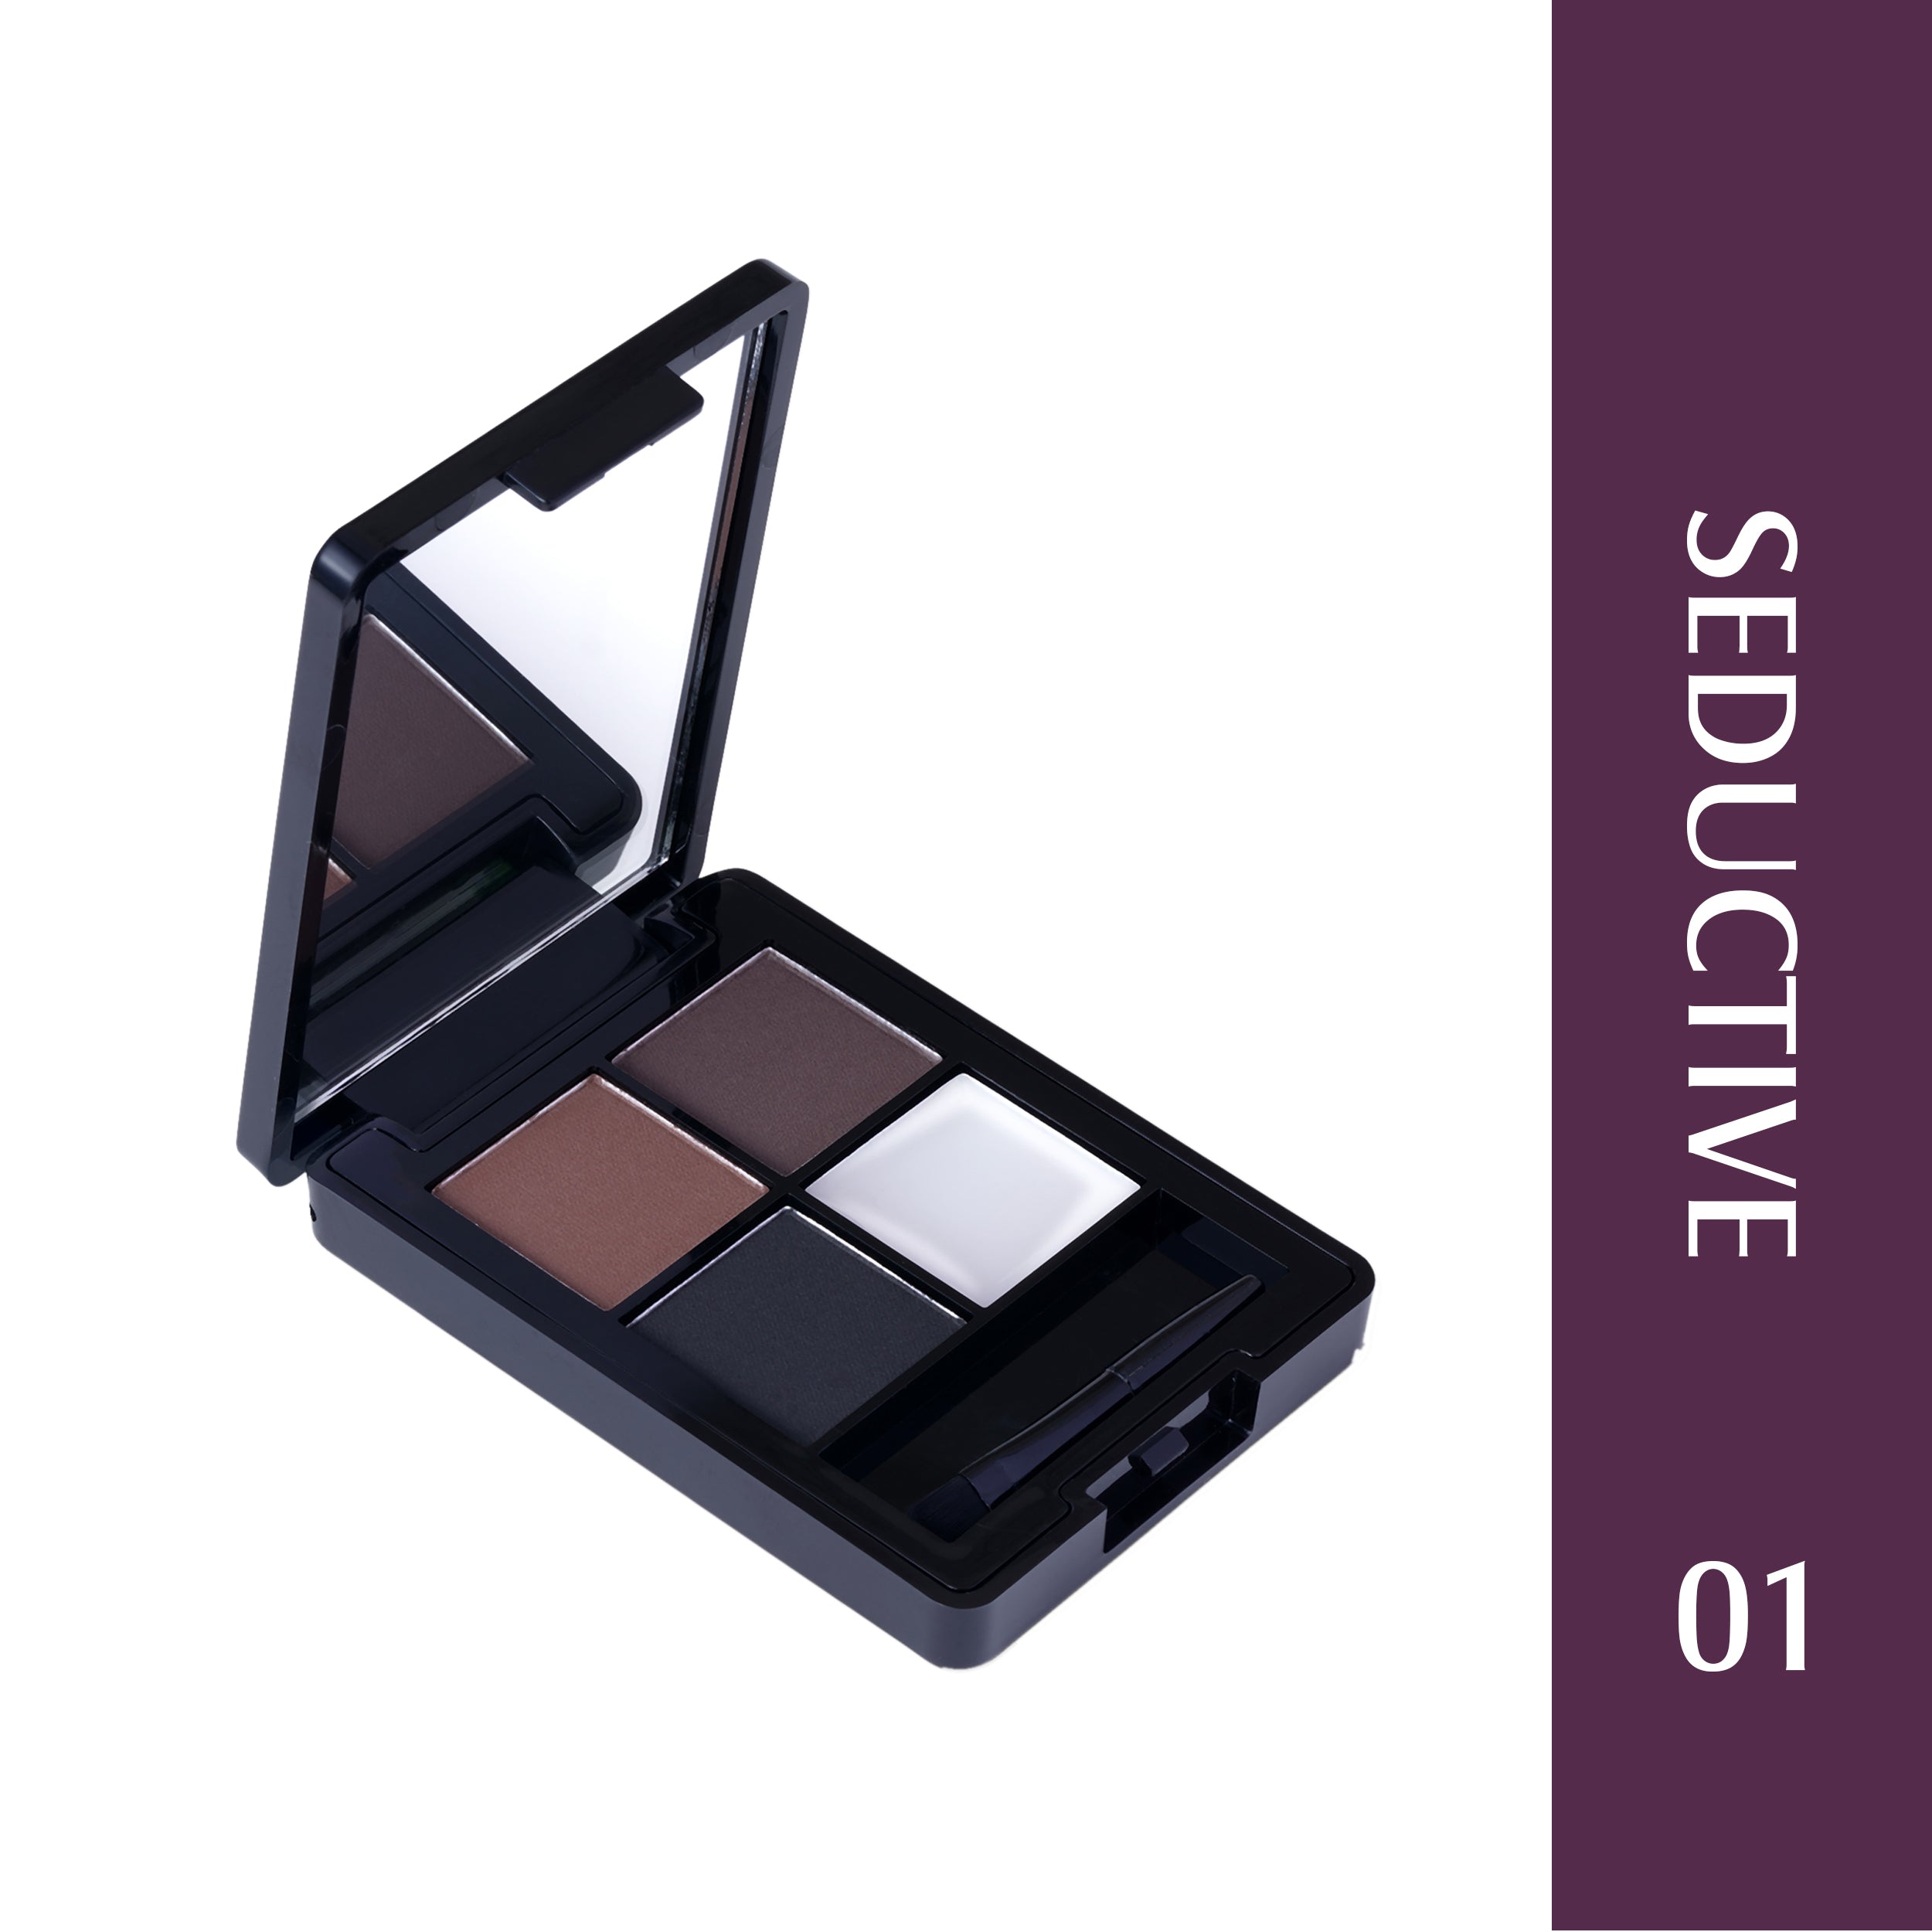 Glam21 4-in-1 Eyebrow Palette Micro Pigments, Smudge Proof, Longlasting Eye Make-up Kit 9 g (SEDUCTIVE)